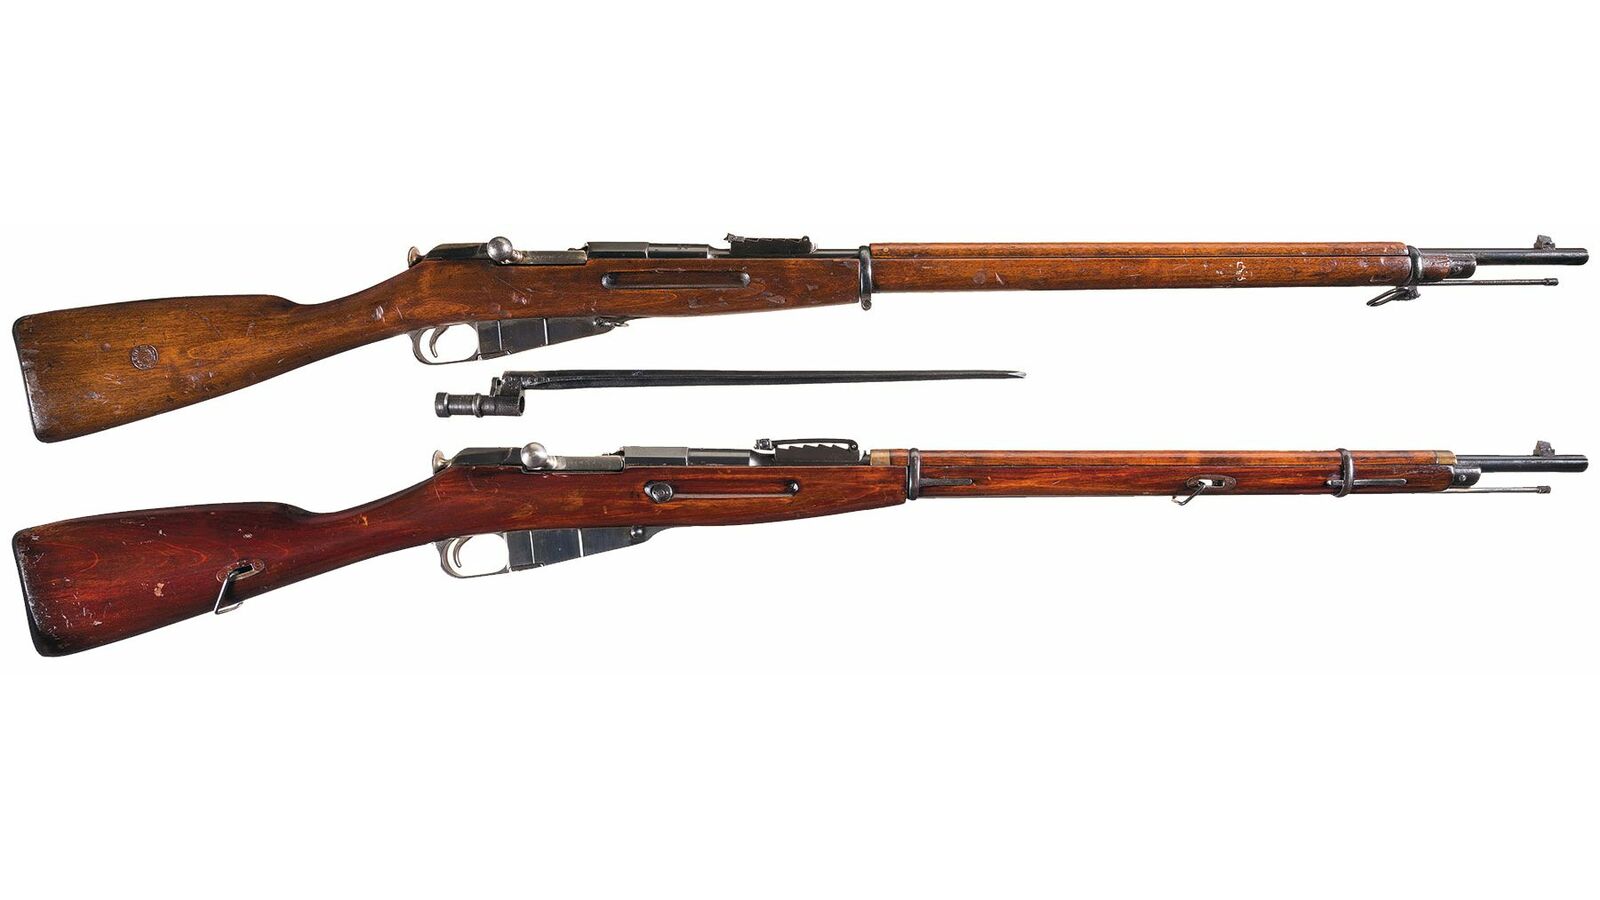 Collector's Lot of Two Mosin-Nagant Model 1891 Bolt Action Rifles -A)